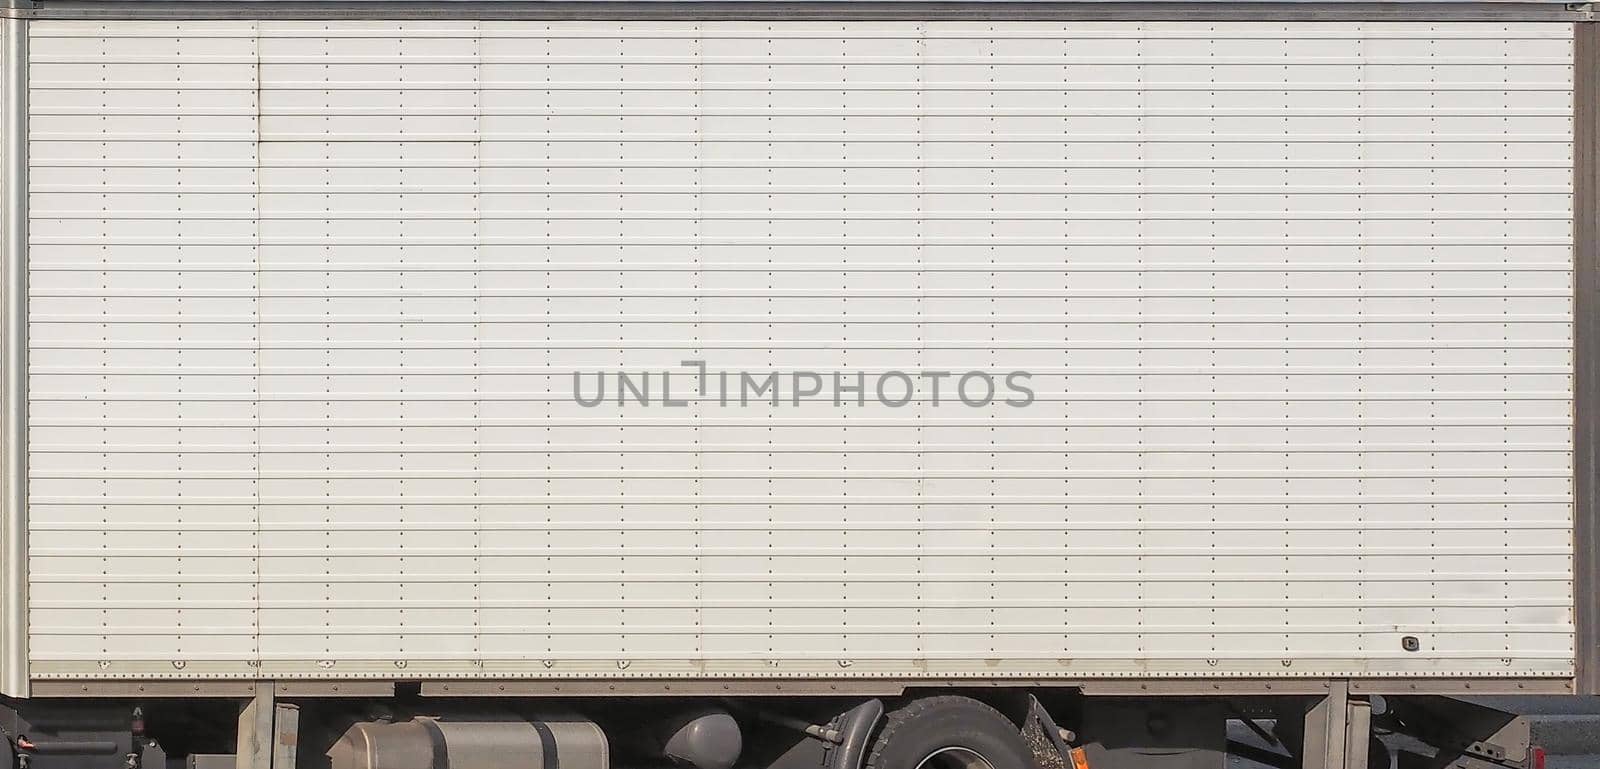 Truck side with copy by claudiodivizia